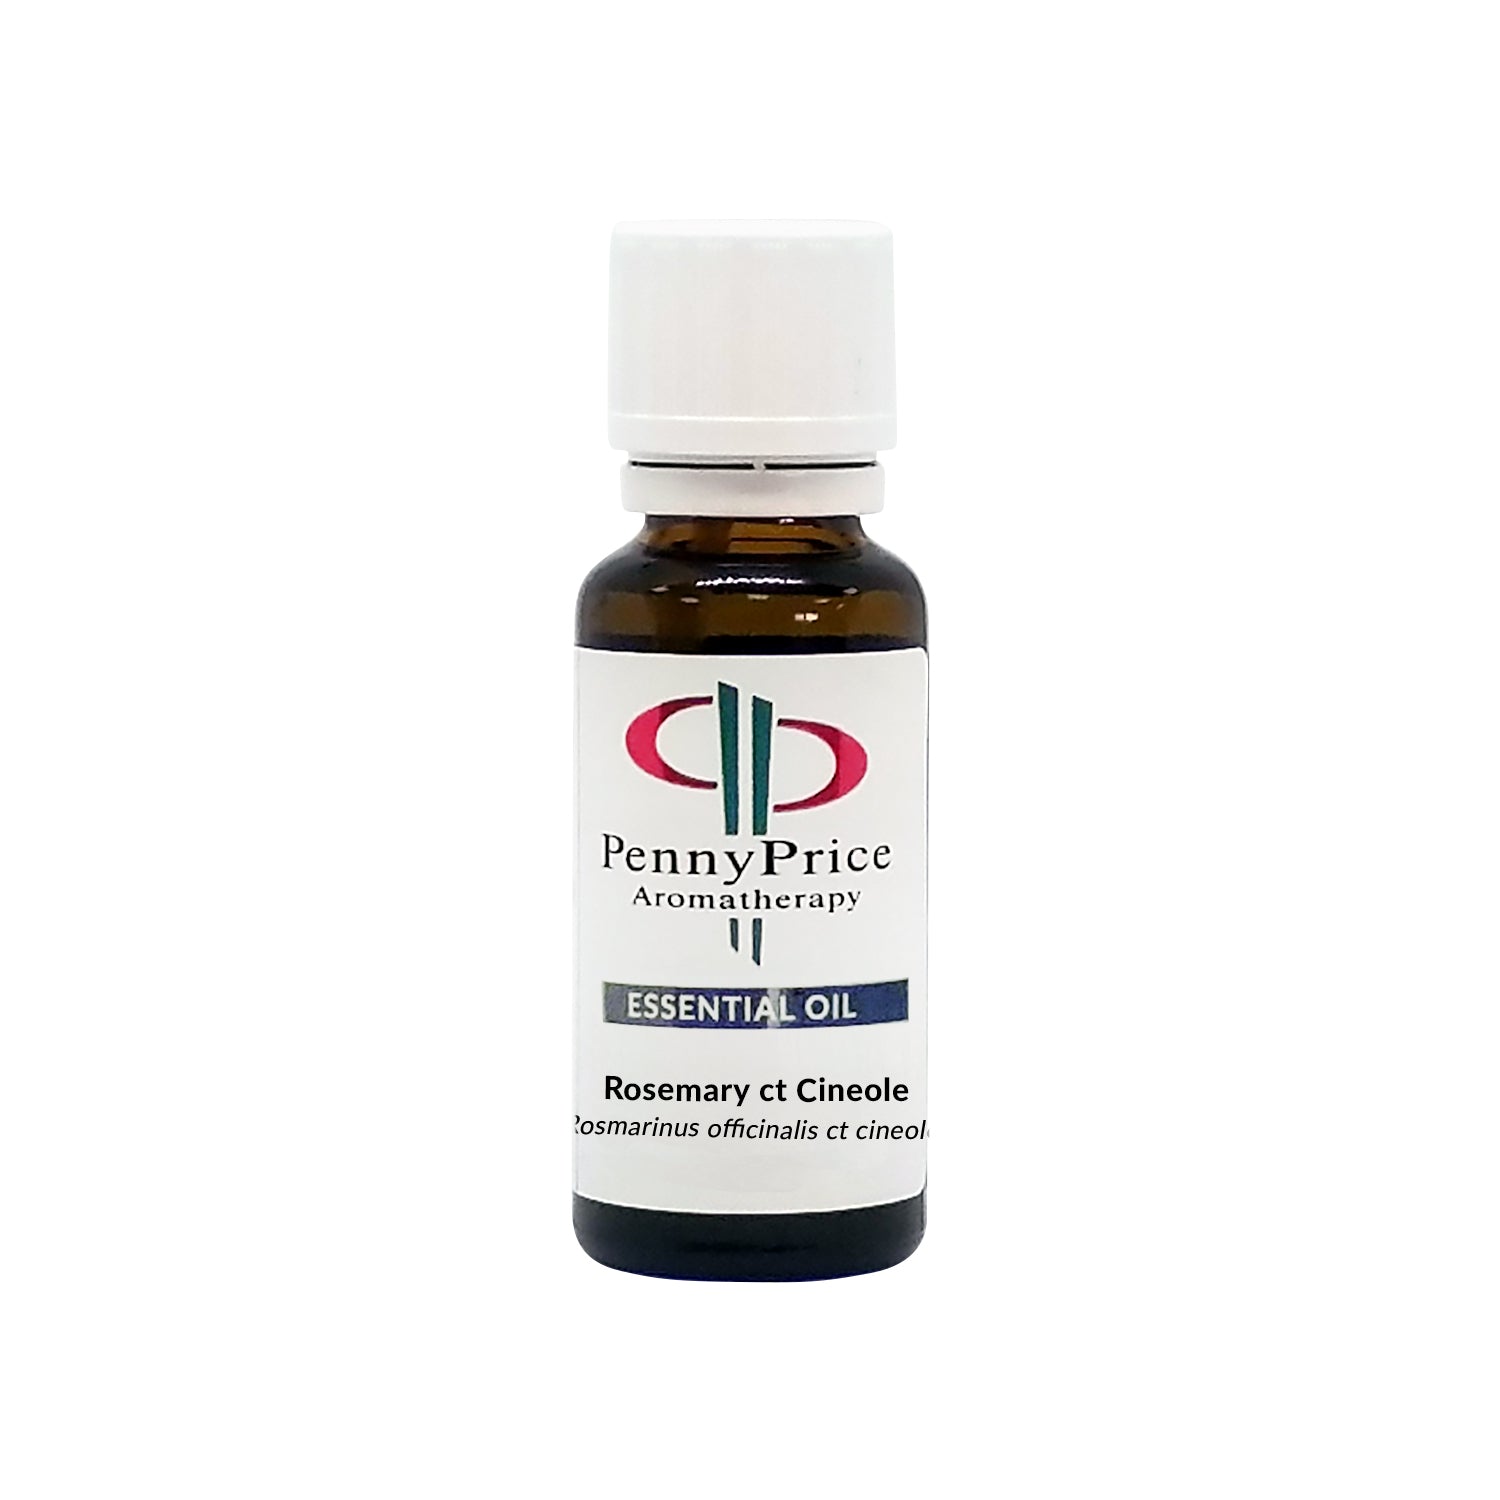 Rosemary ct Cineole Essential Oil